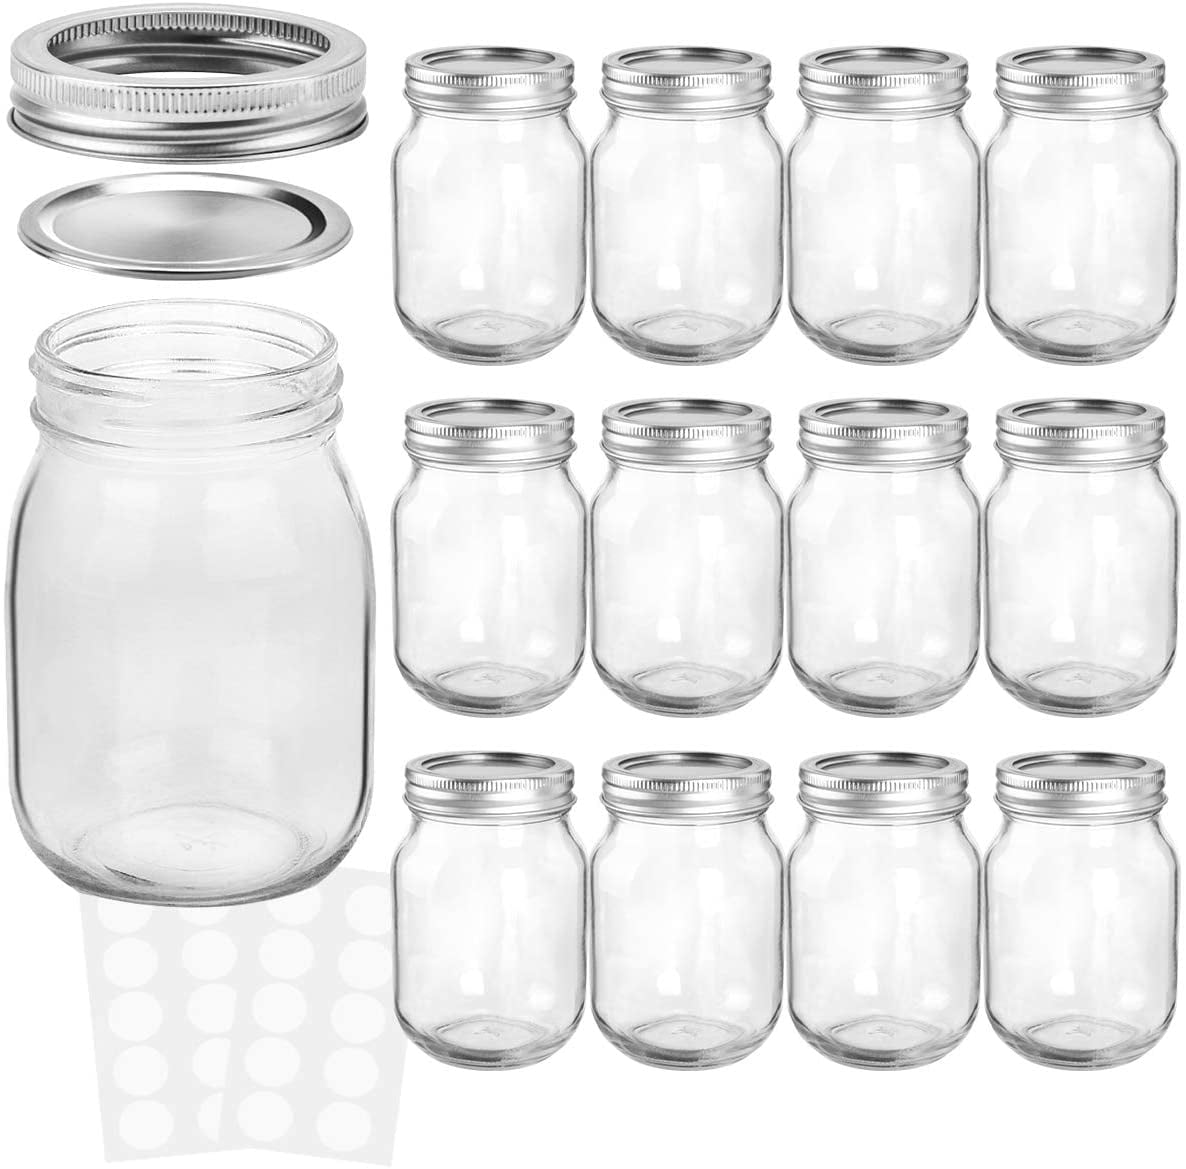  KAMOTA Glass Jars With Lids, 30 pack of 3.5 oz small glass jars  for storage spice herbal condiments with leak-proof rubber gaskets and  airtight hinged lids, 280 labels and 2 silicone